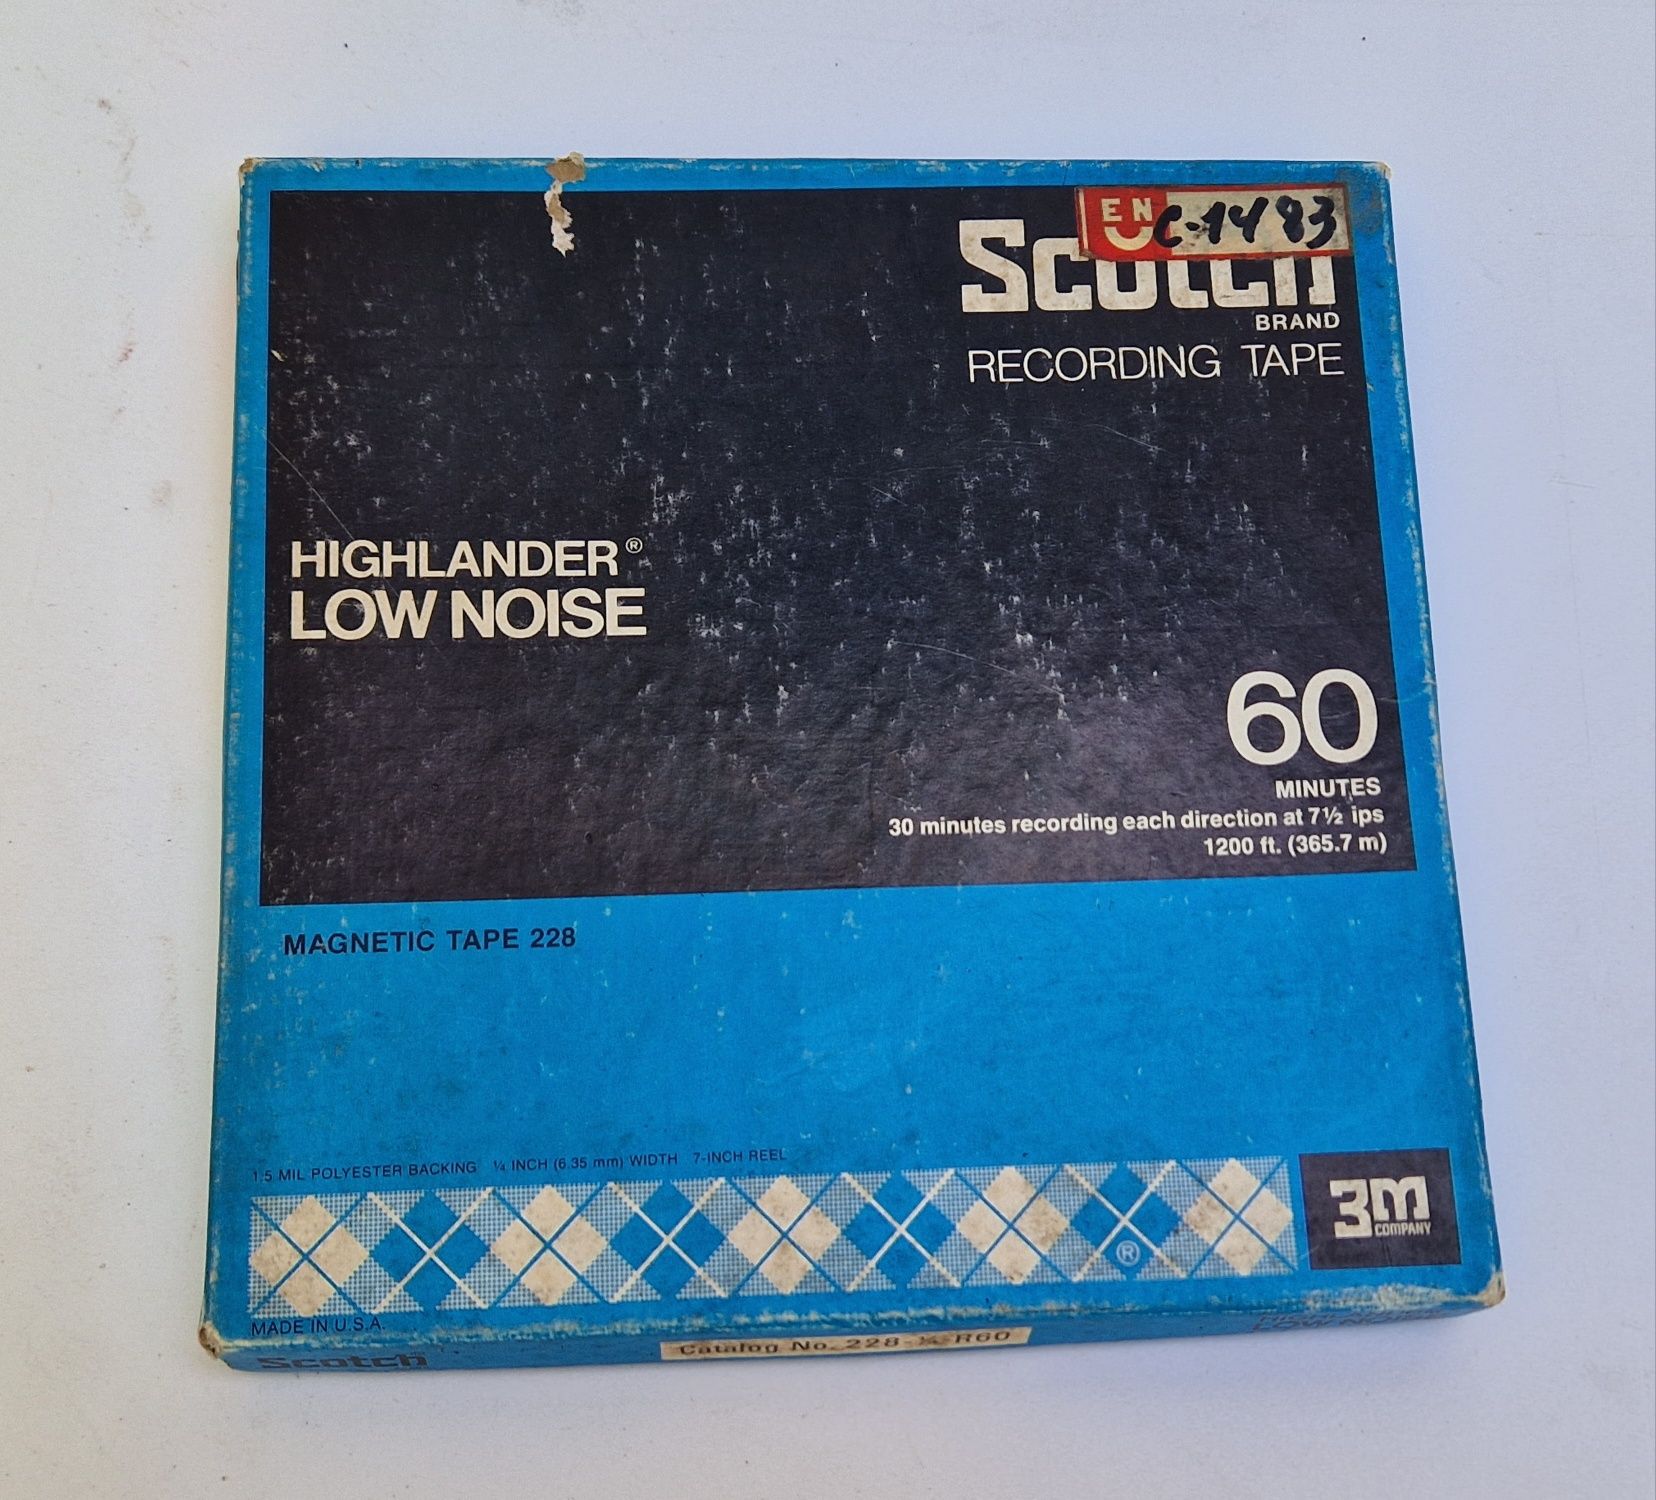 Scotch Magnetic Tape 228 - 60 Minutos - 1977